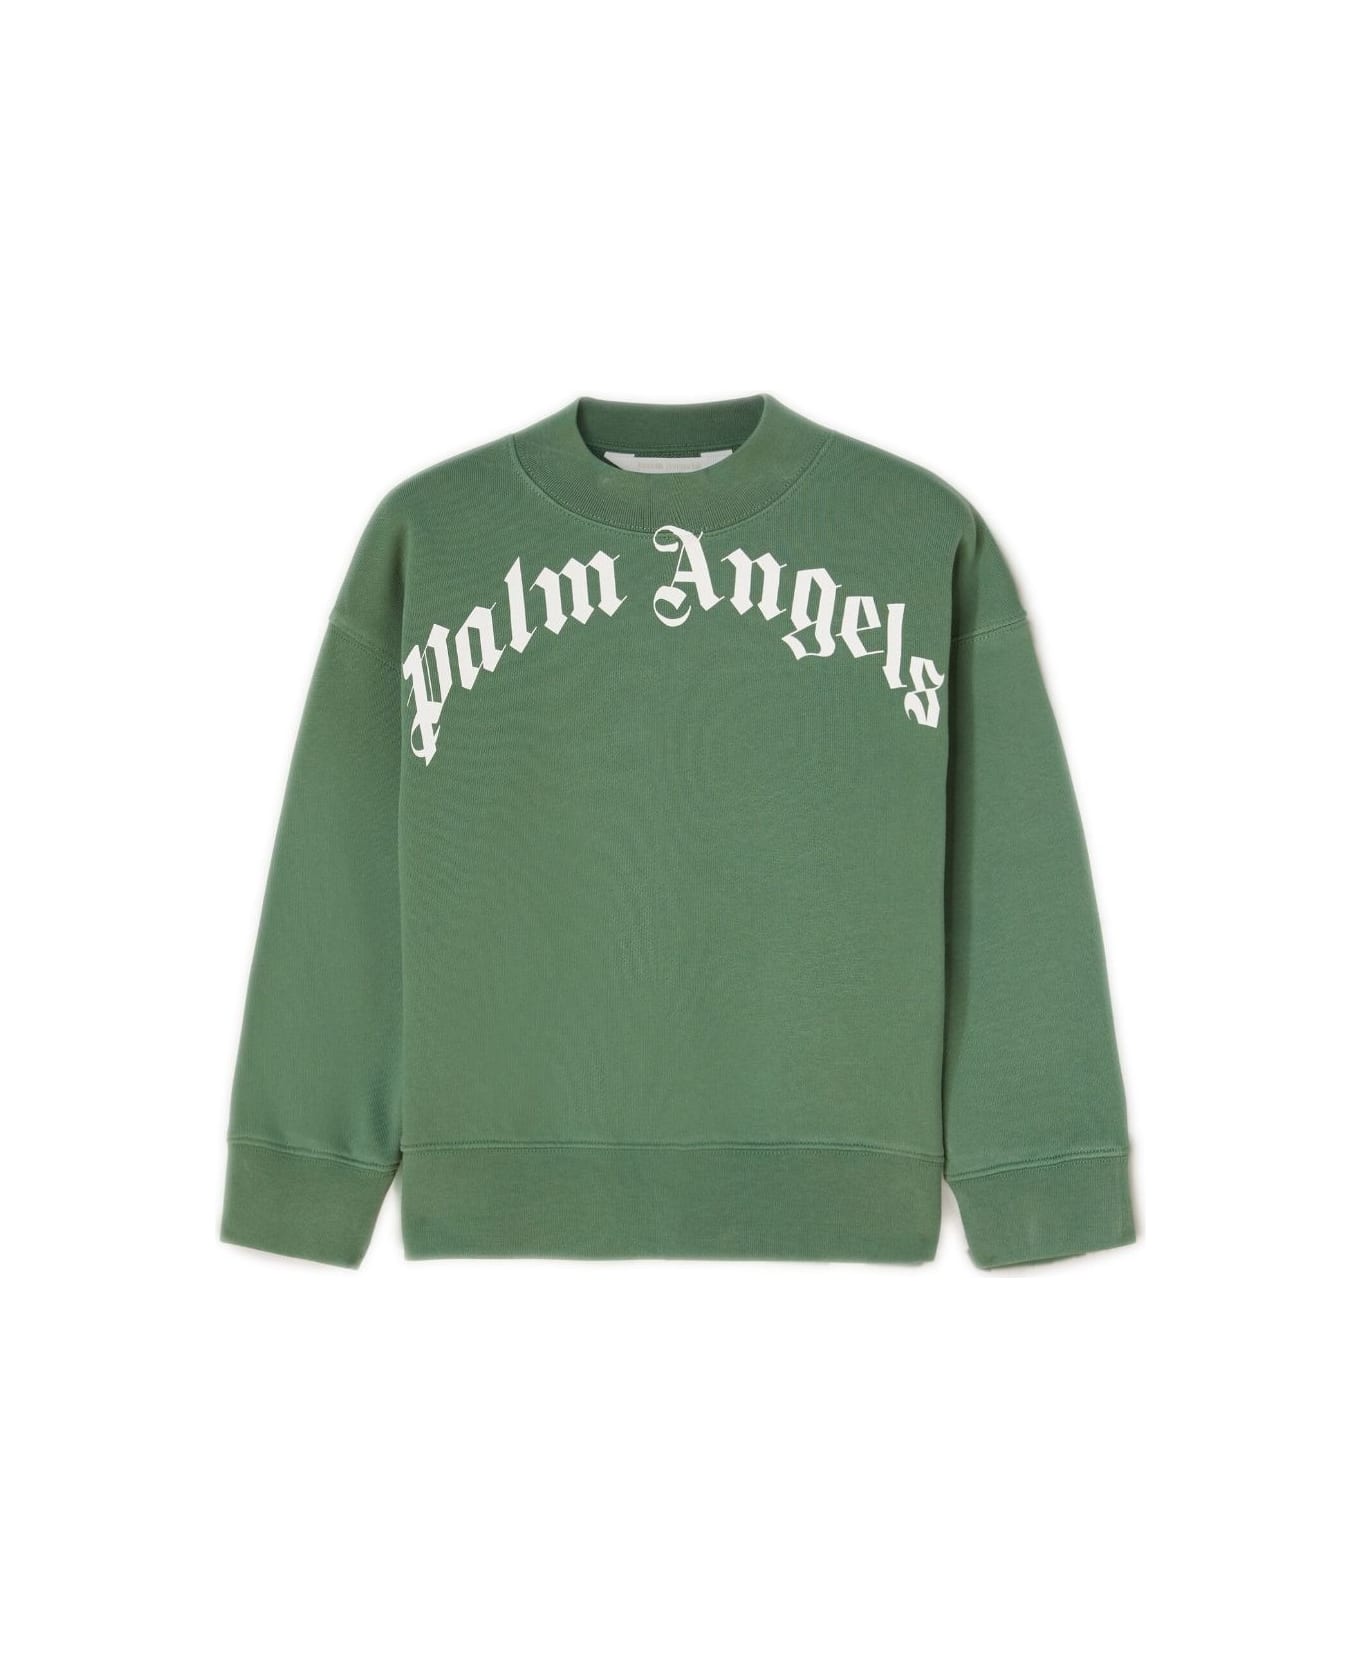 Palm Angels Green Crew Neck Sweatshirt With Curved Logo - Green